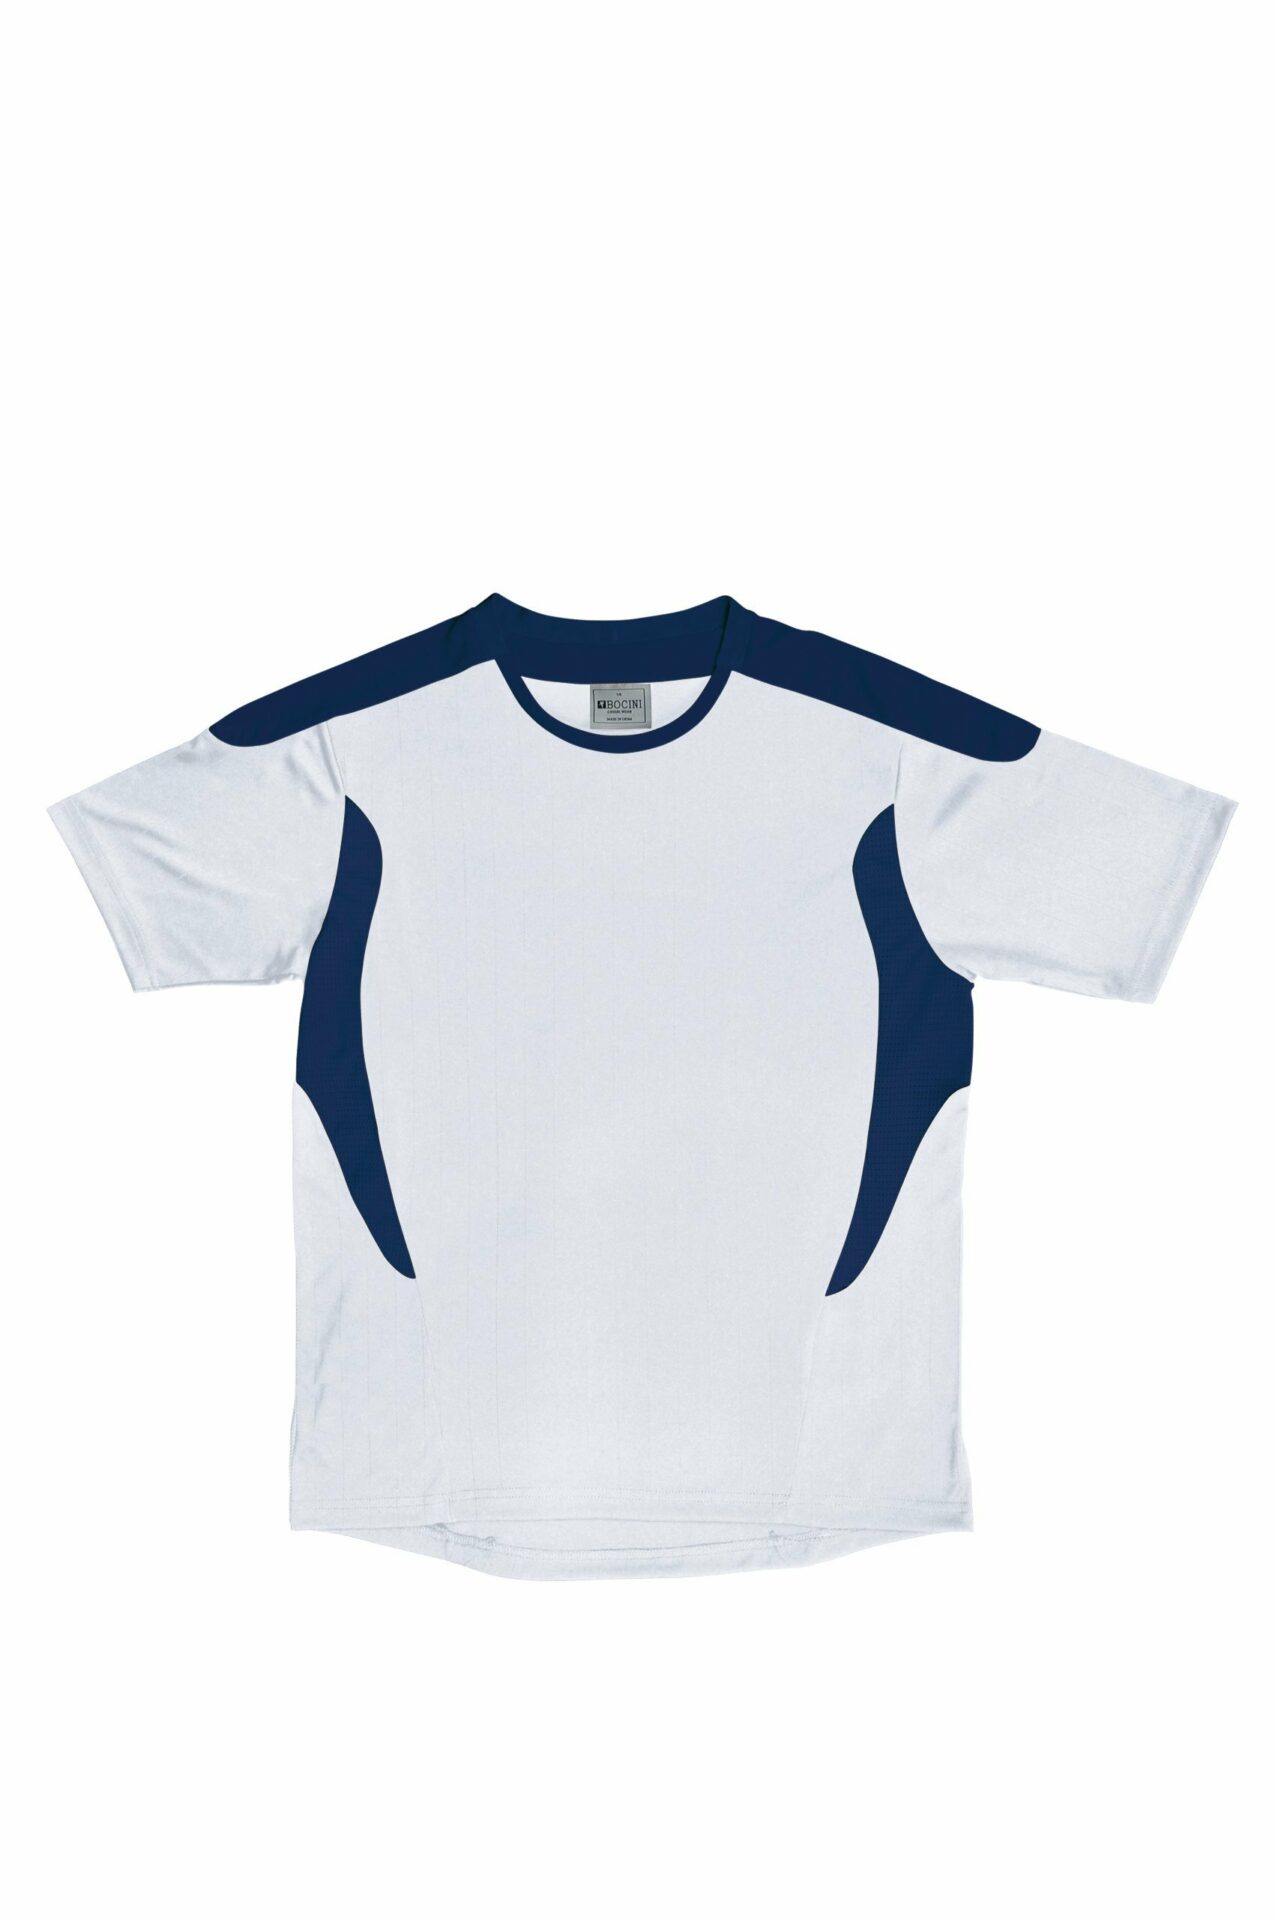 Buy CT1217-Unisex Adults All Sports Tee Shirt at Best Price - AJ Safety